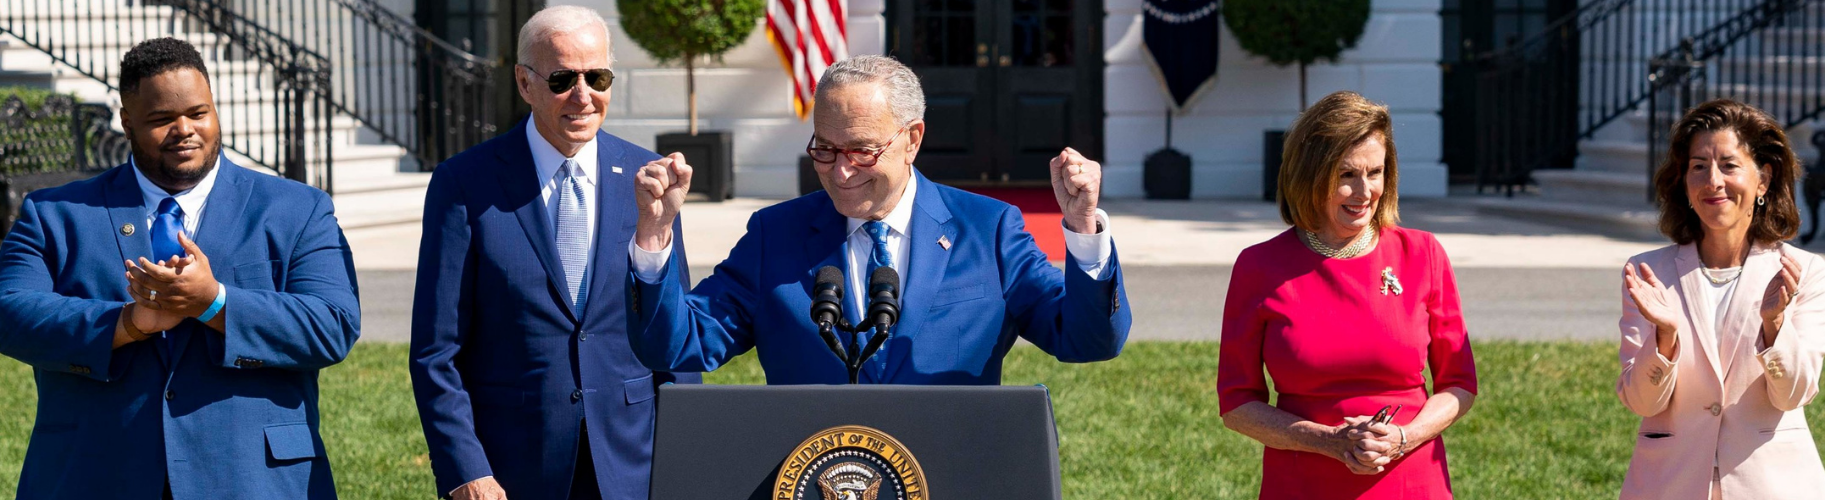 Senator Chuck Schumer stands at the podium with his arms raised in celebration and a smile. Behind him is businessman Joshua Aviv, President Joe Biden, Speaker Nancy Pelosi, and Secretary of Commerce Gina Raimondo, who are smiling and clapping.